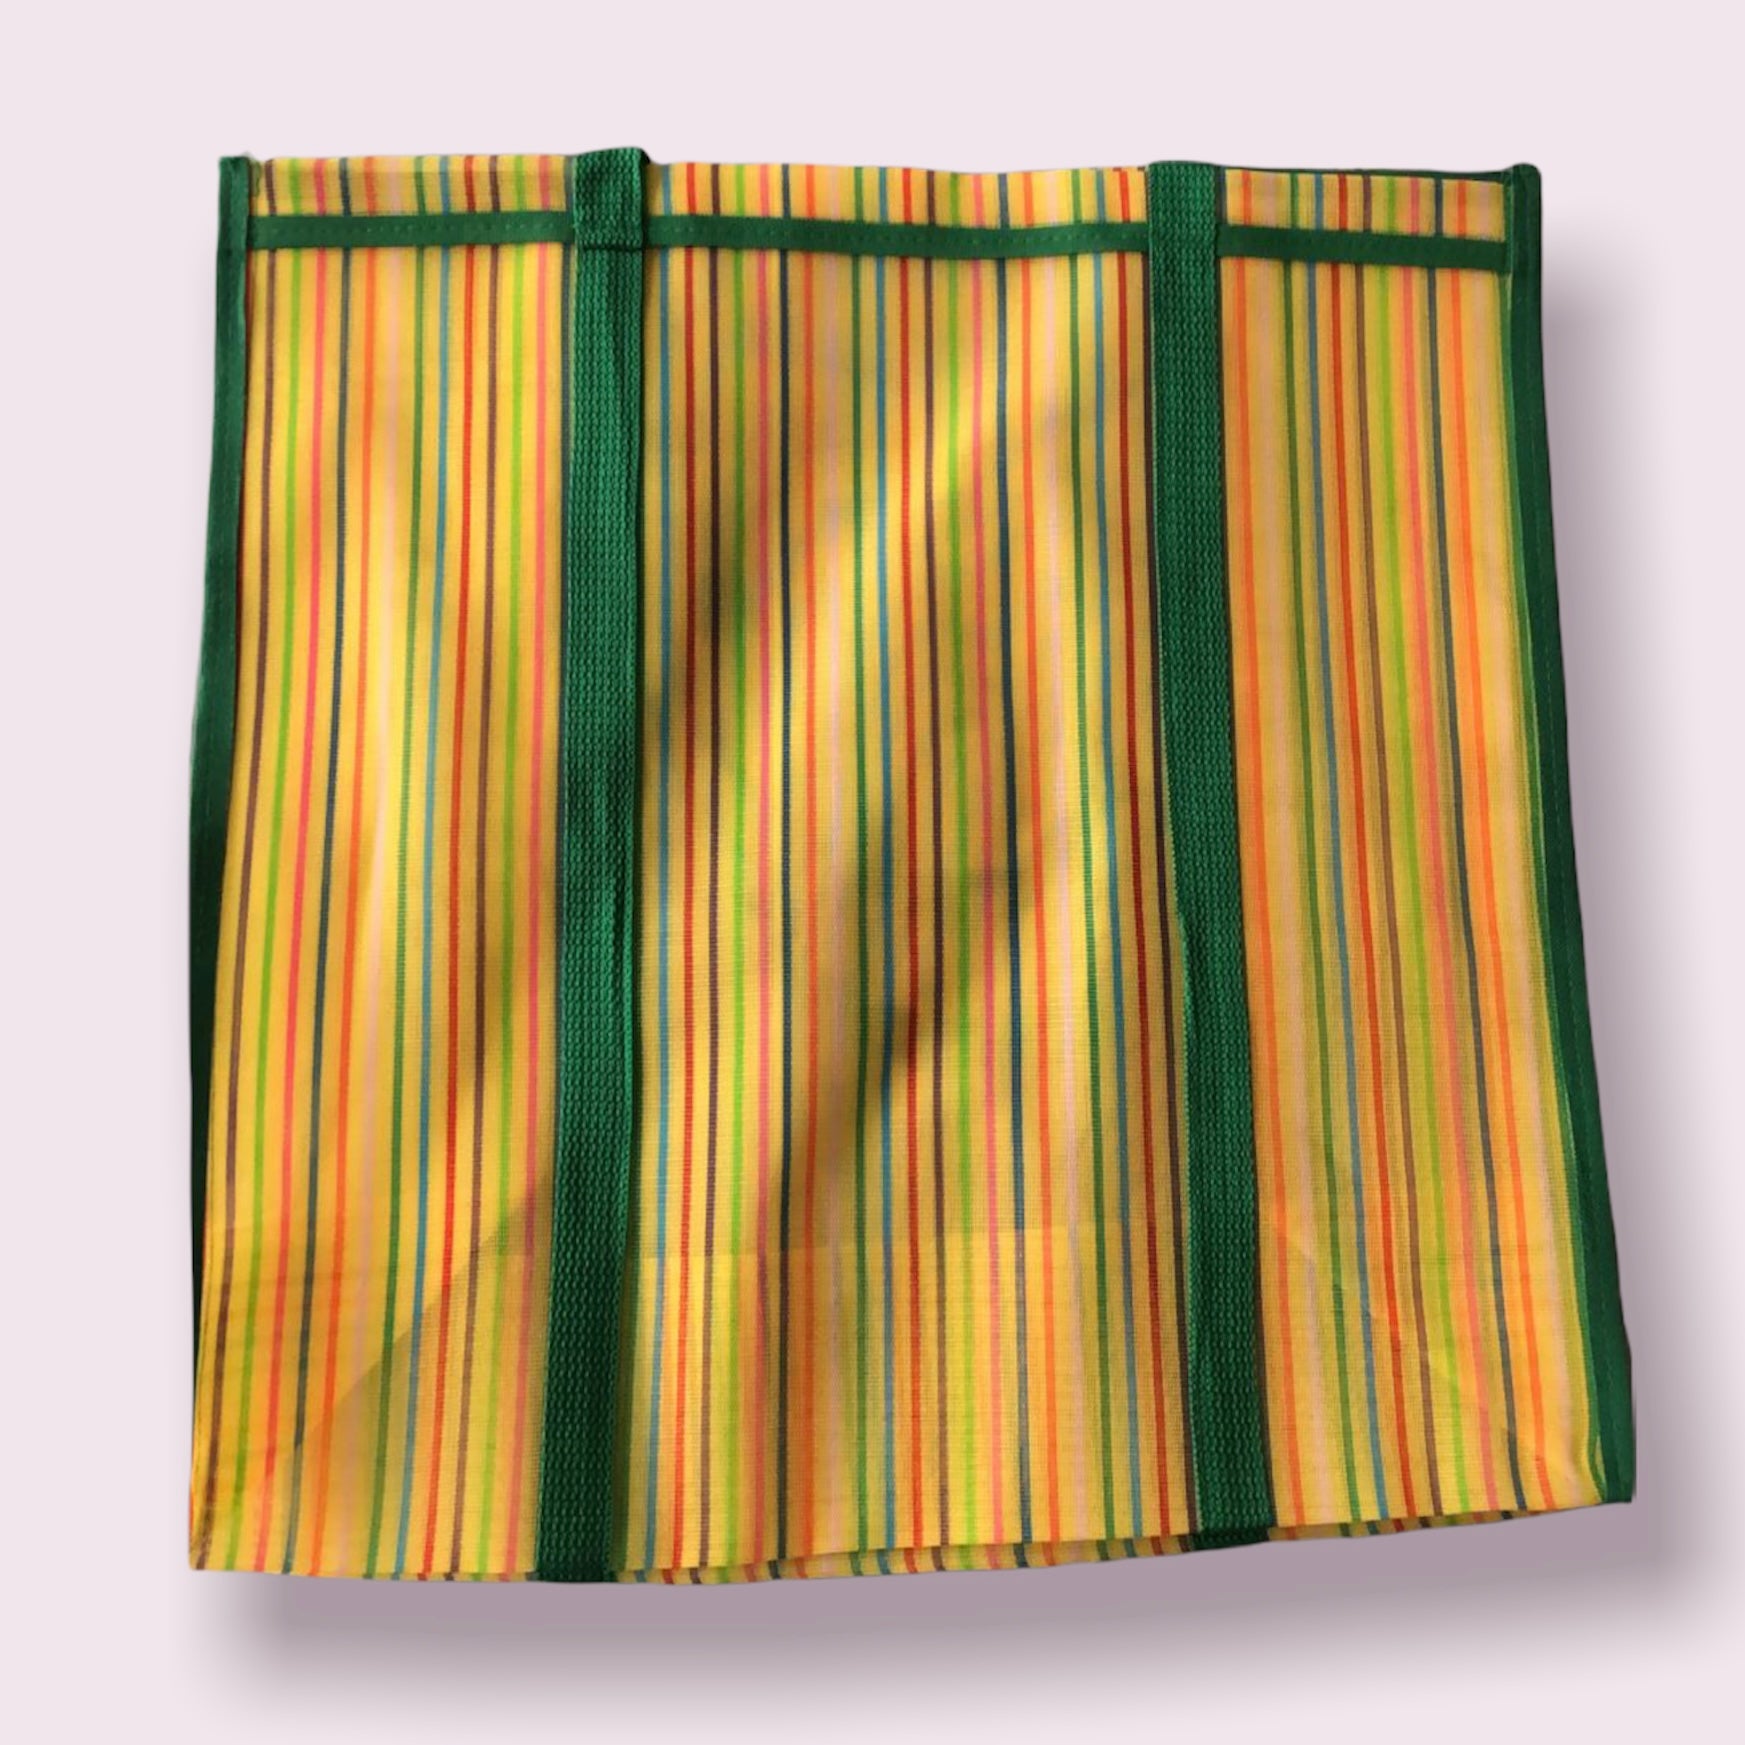 Mexican Plastic Bag 19 x 19 in